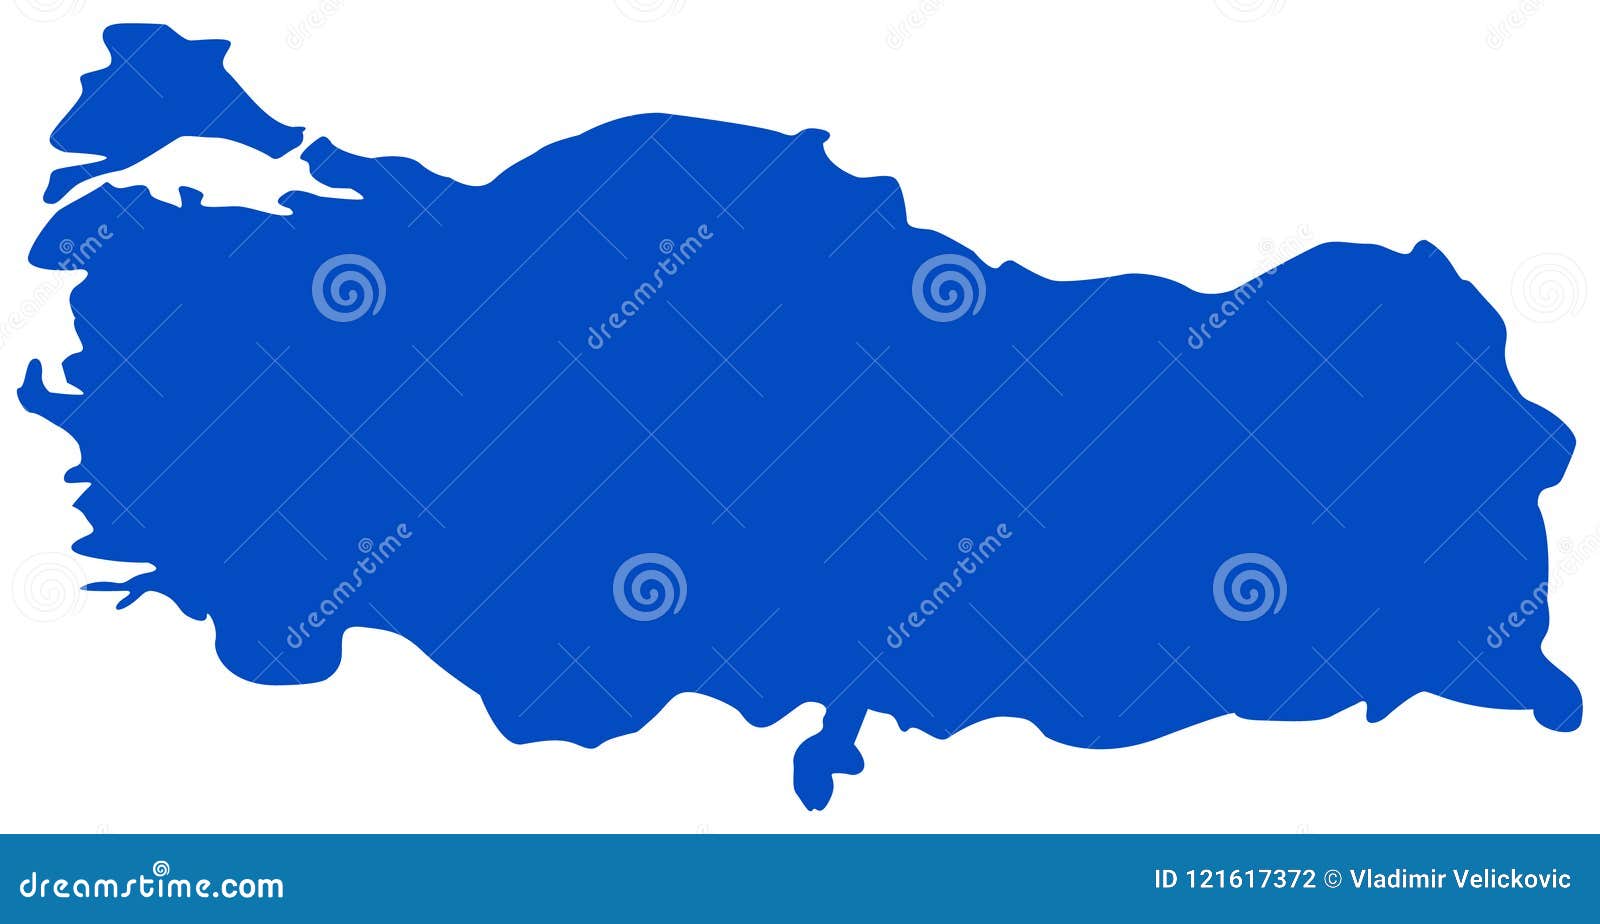 turkey map - transcontinental country in eurasia